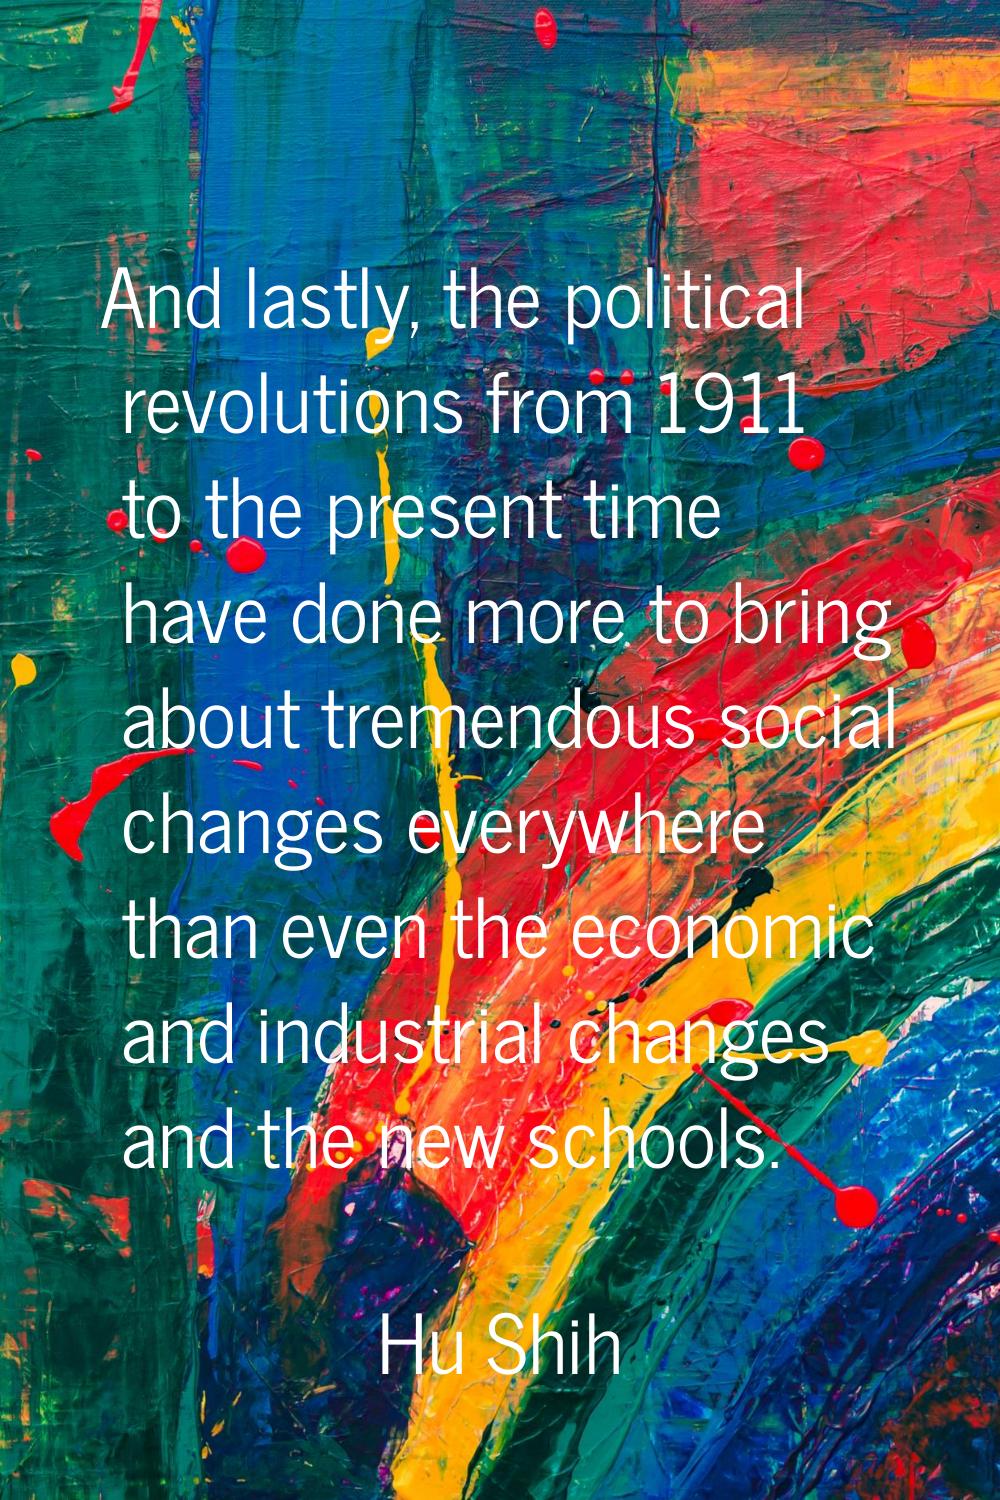 And lastly, the political revolutions from 1911 to the present time have done more to bring about t